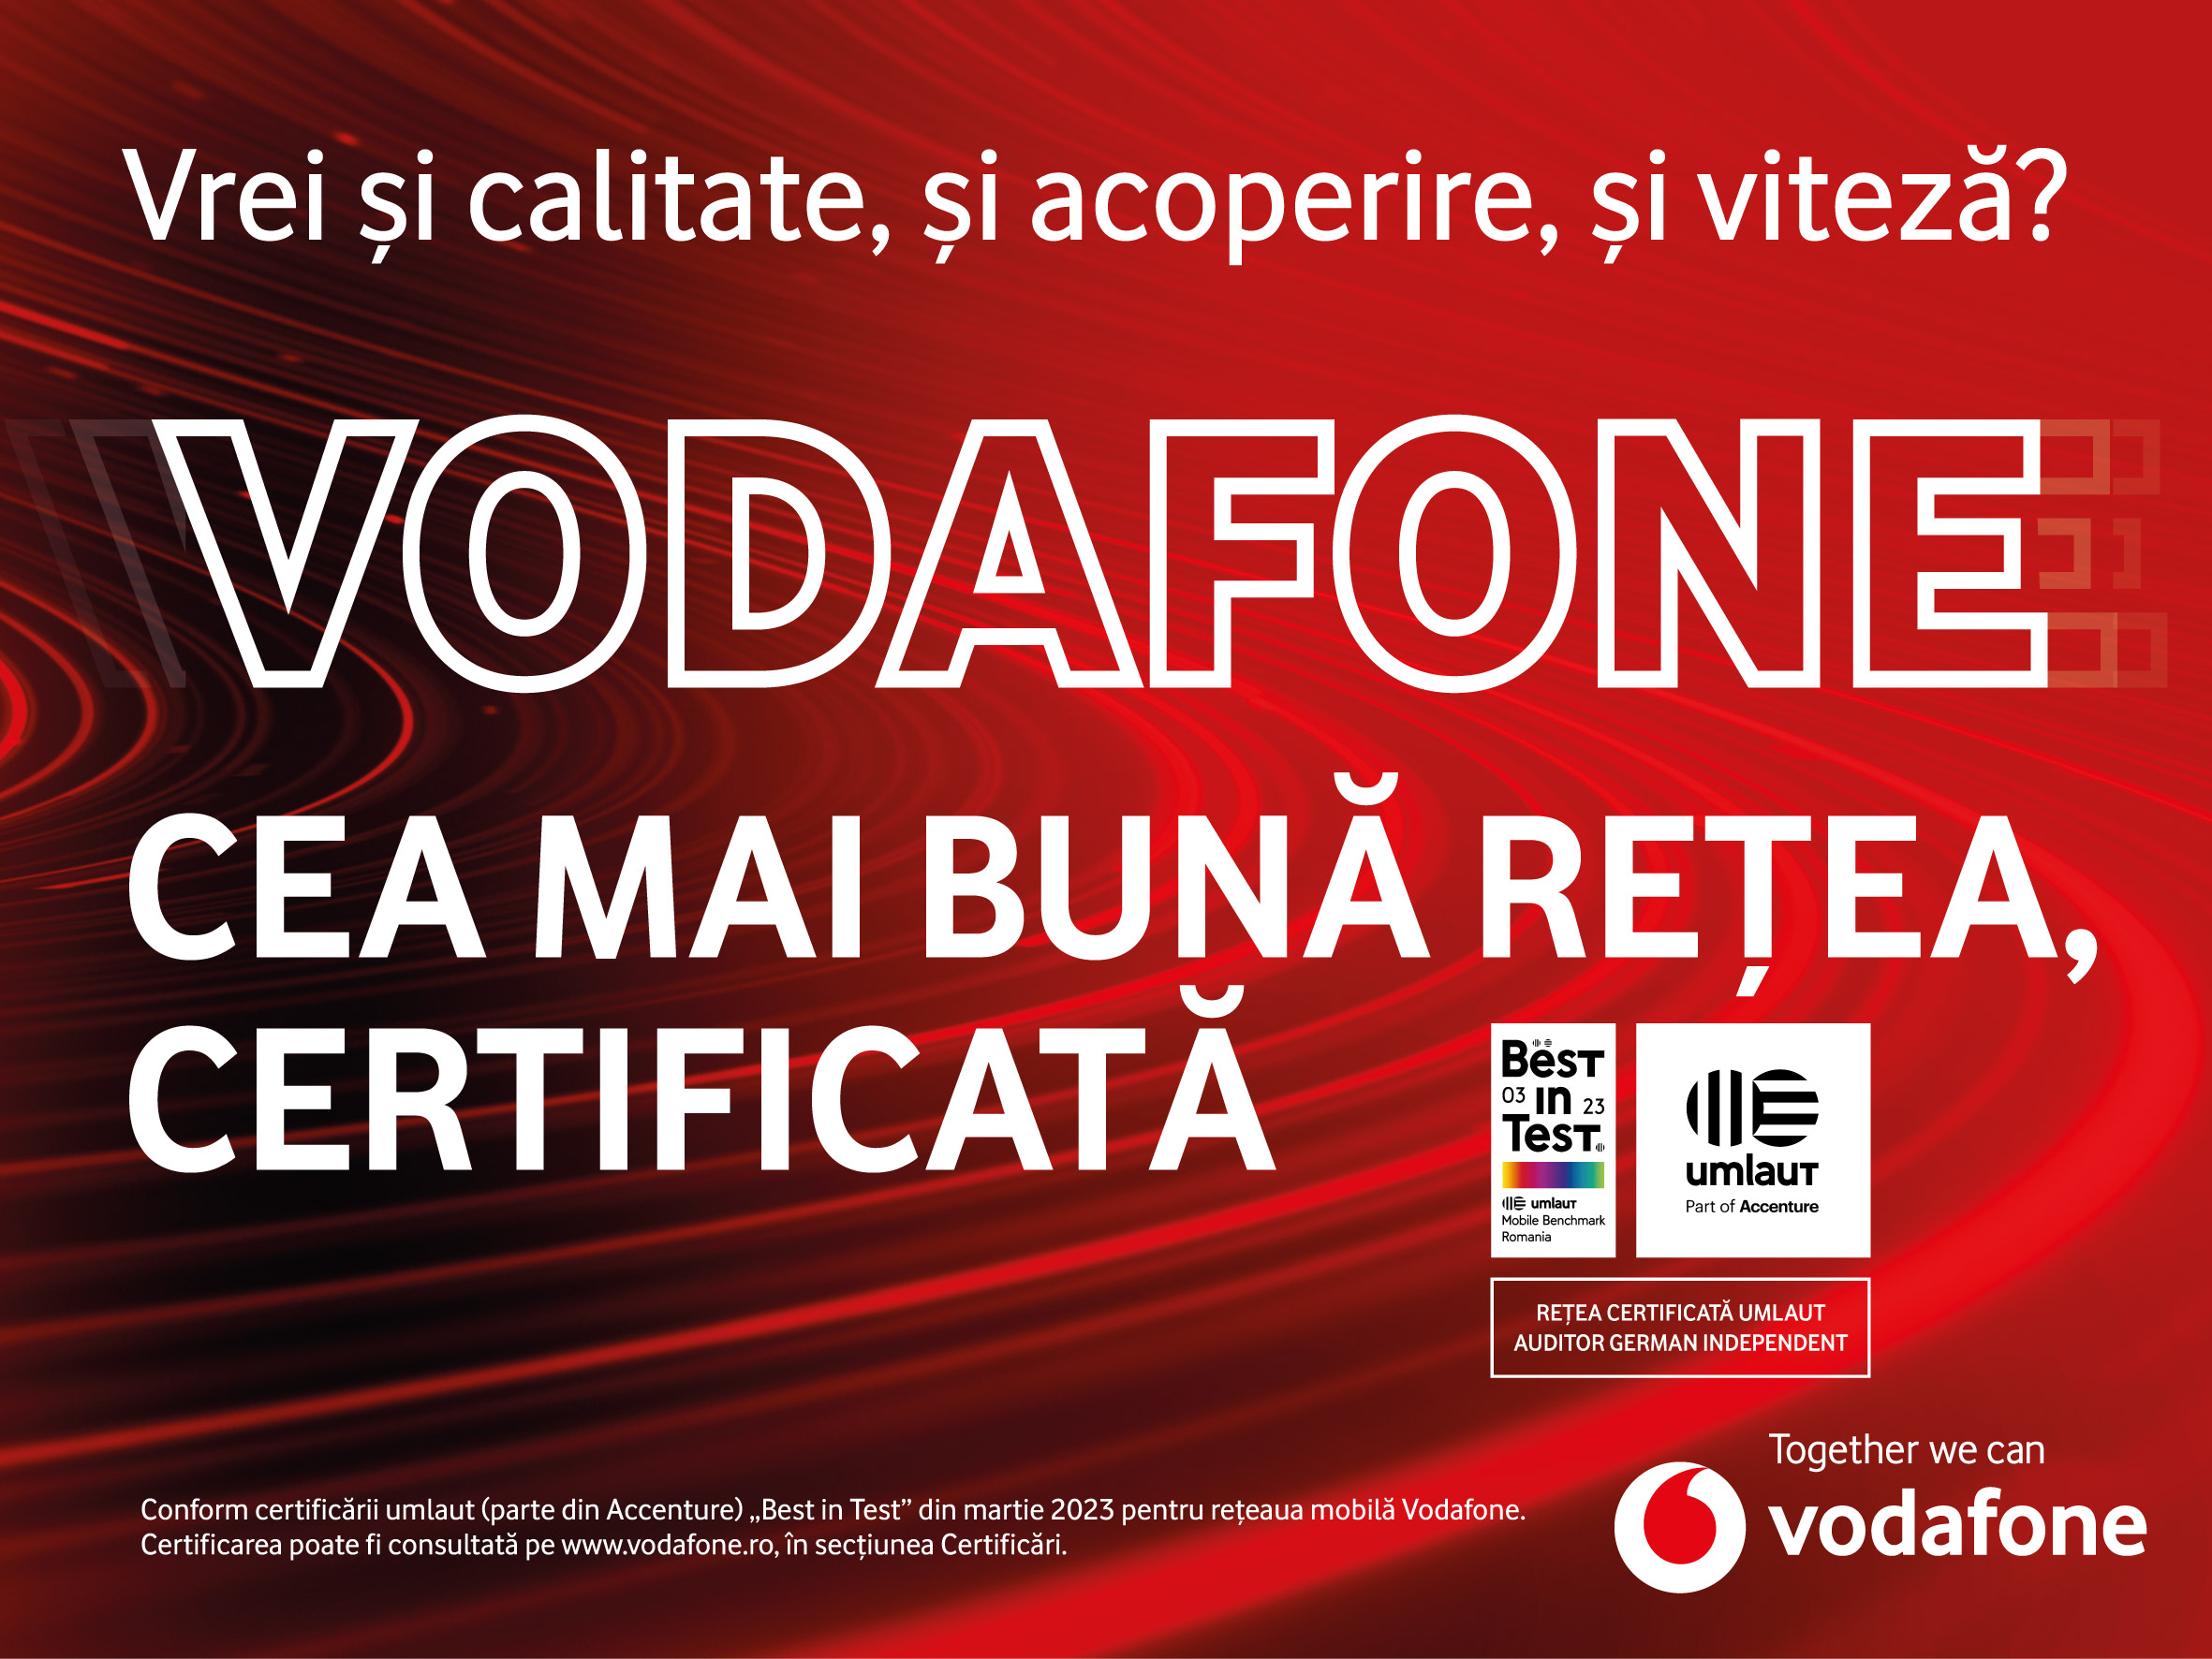 Vodafone received the umlaut “Best in Test” certification for the best mobile network in Romania